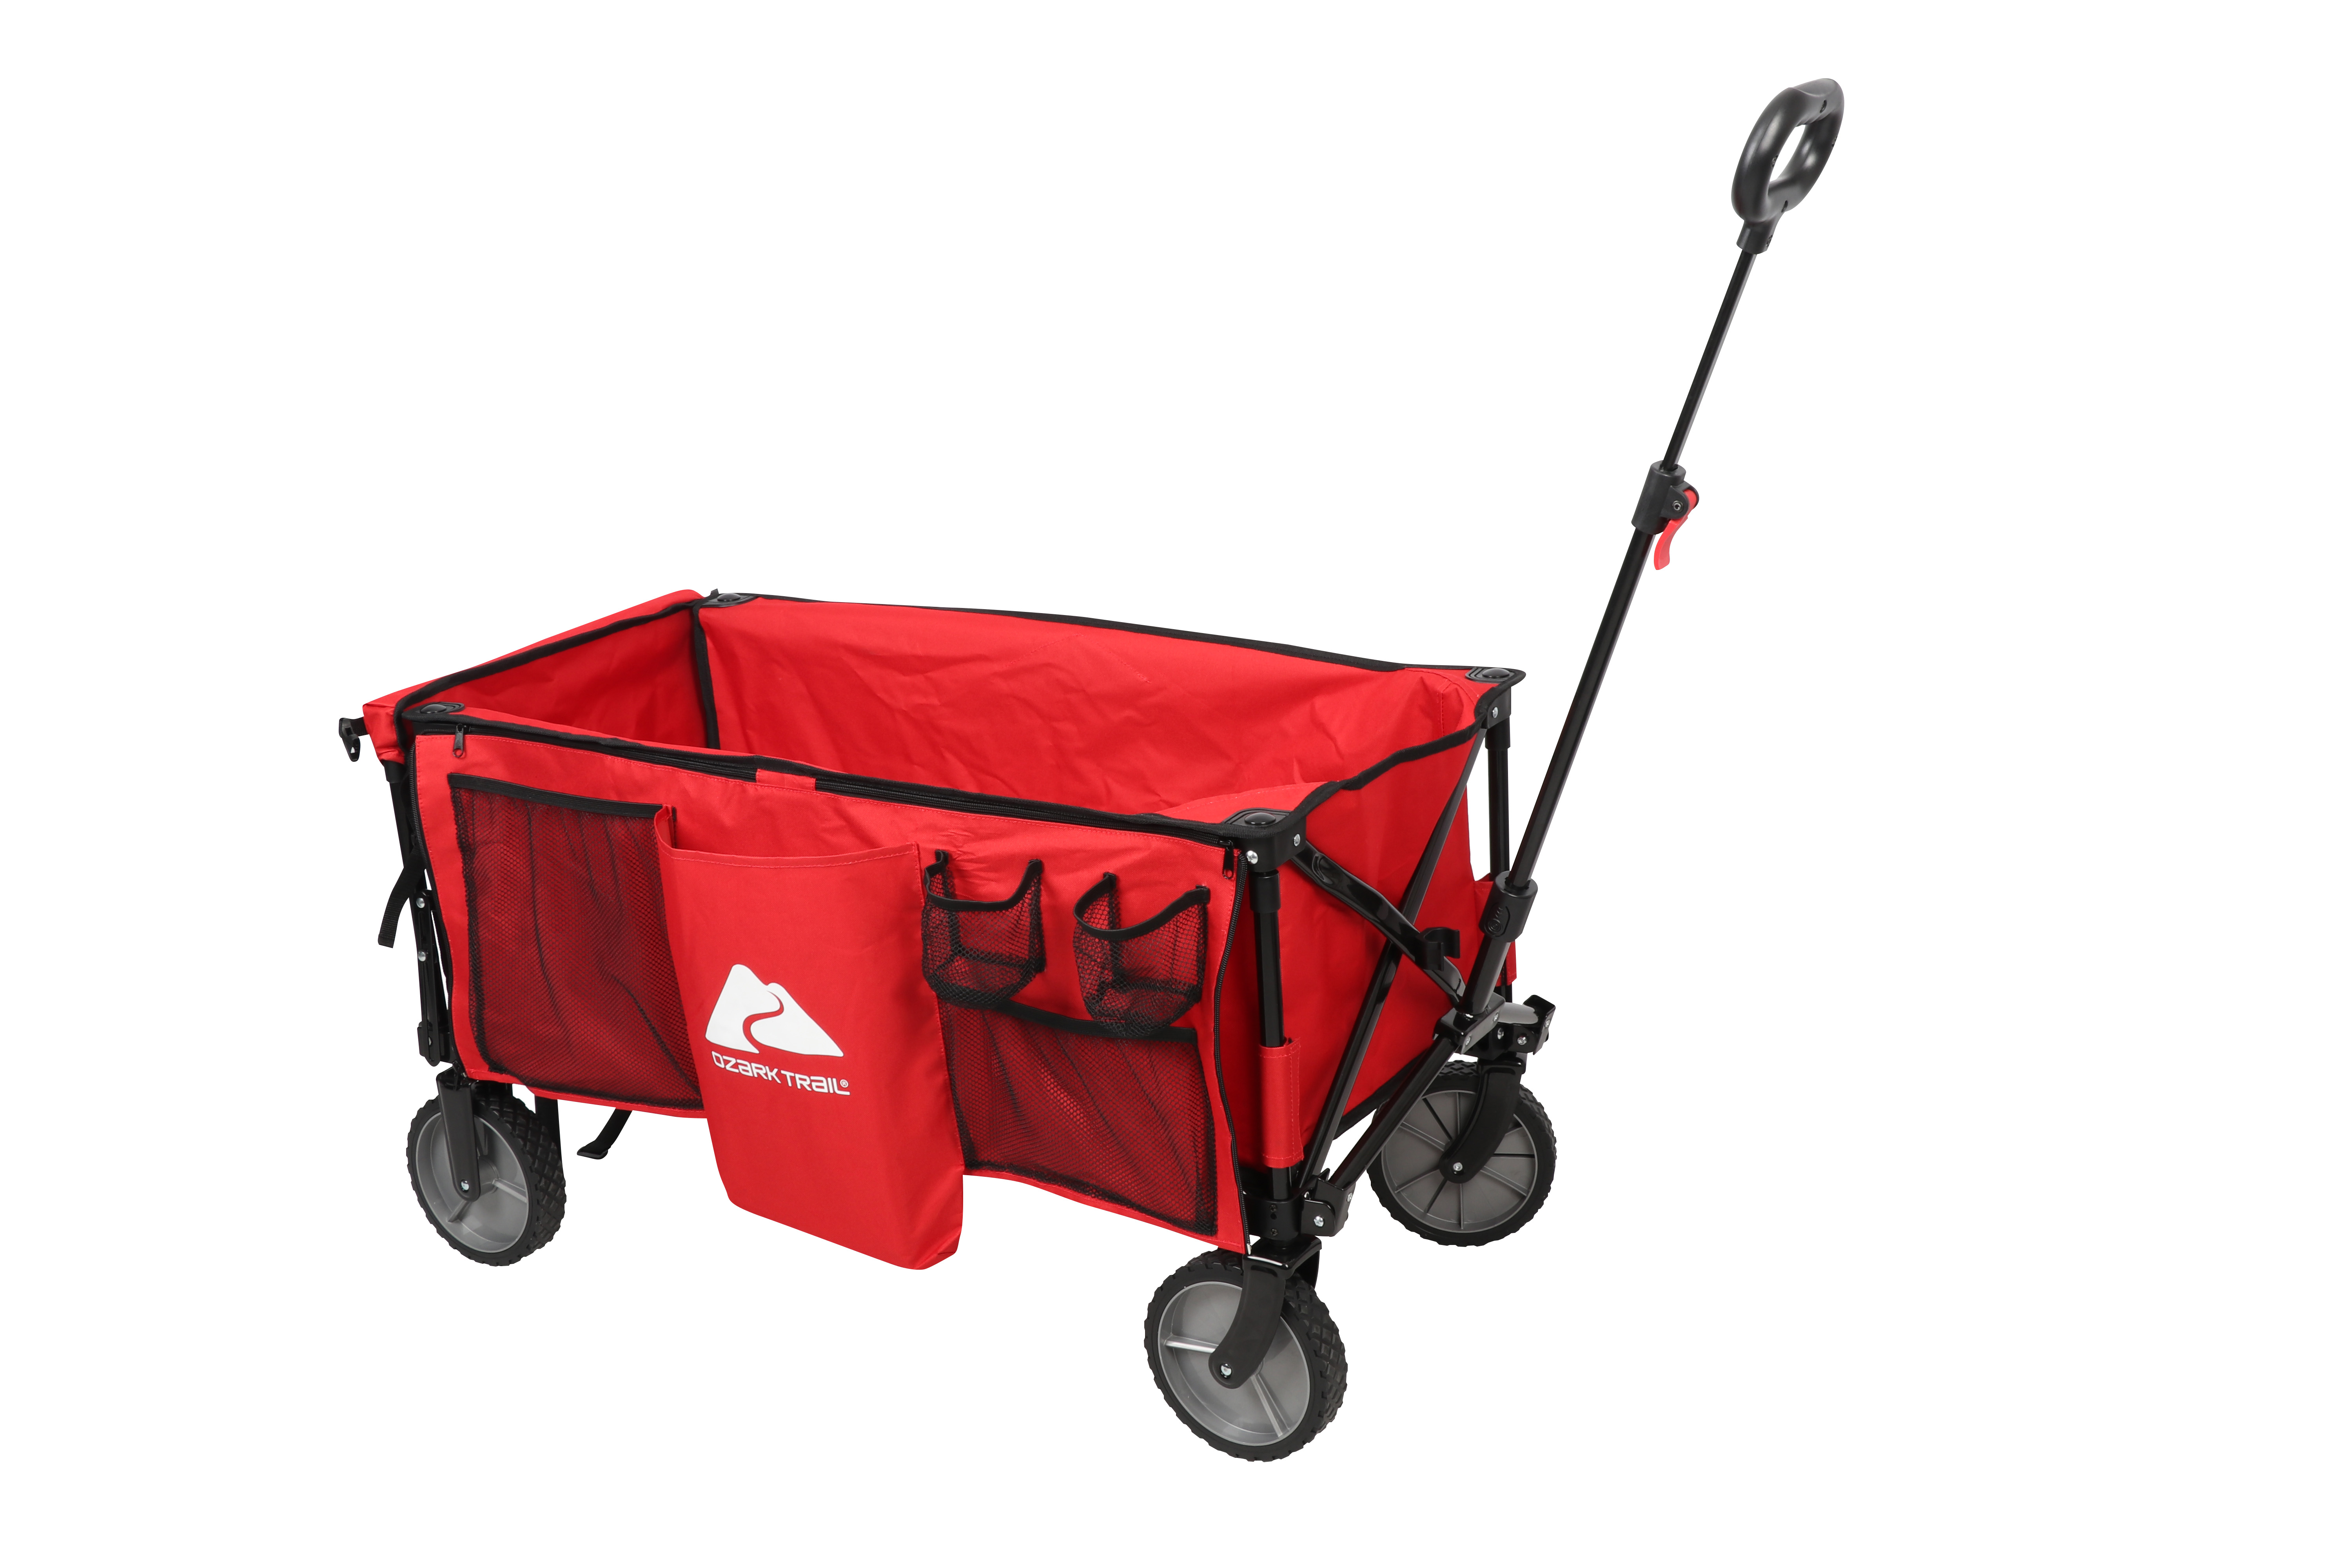 Ozark Trail Camping Utility Wagon with Tailgate & Extension Handle, Red, Polyester - image 4 of 8